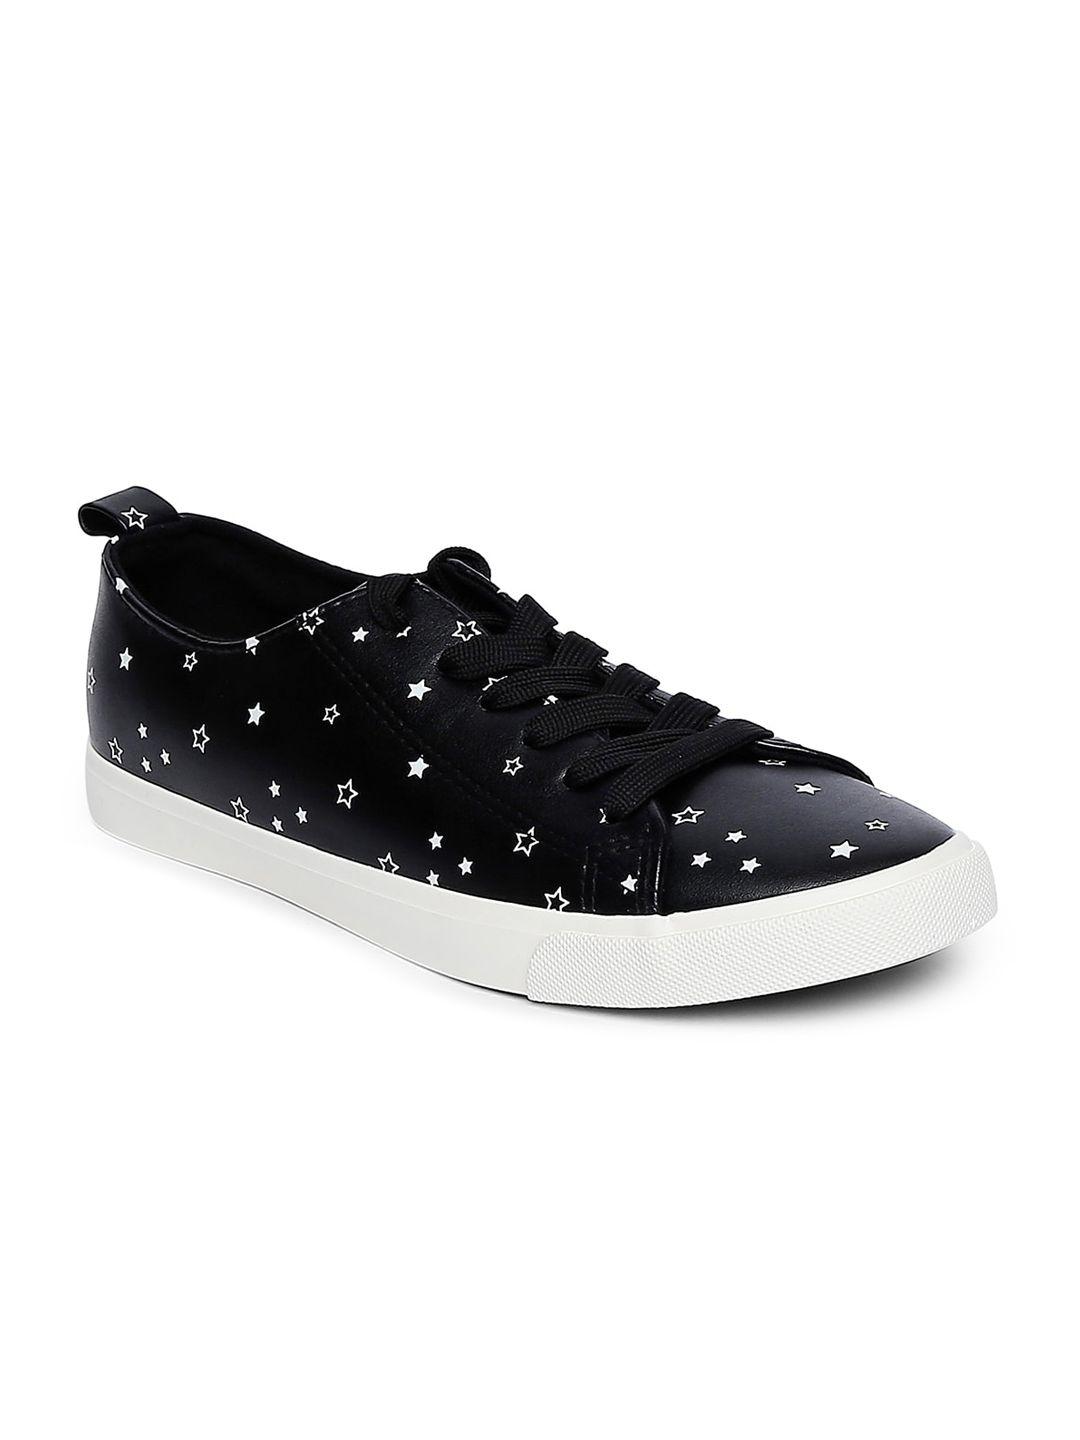 forever glam by pantaloons women black & white printed leather sneakers